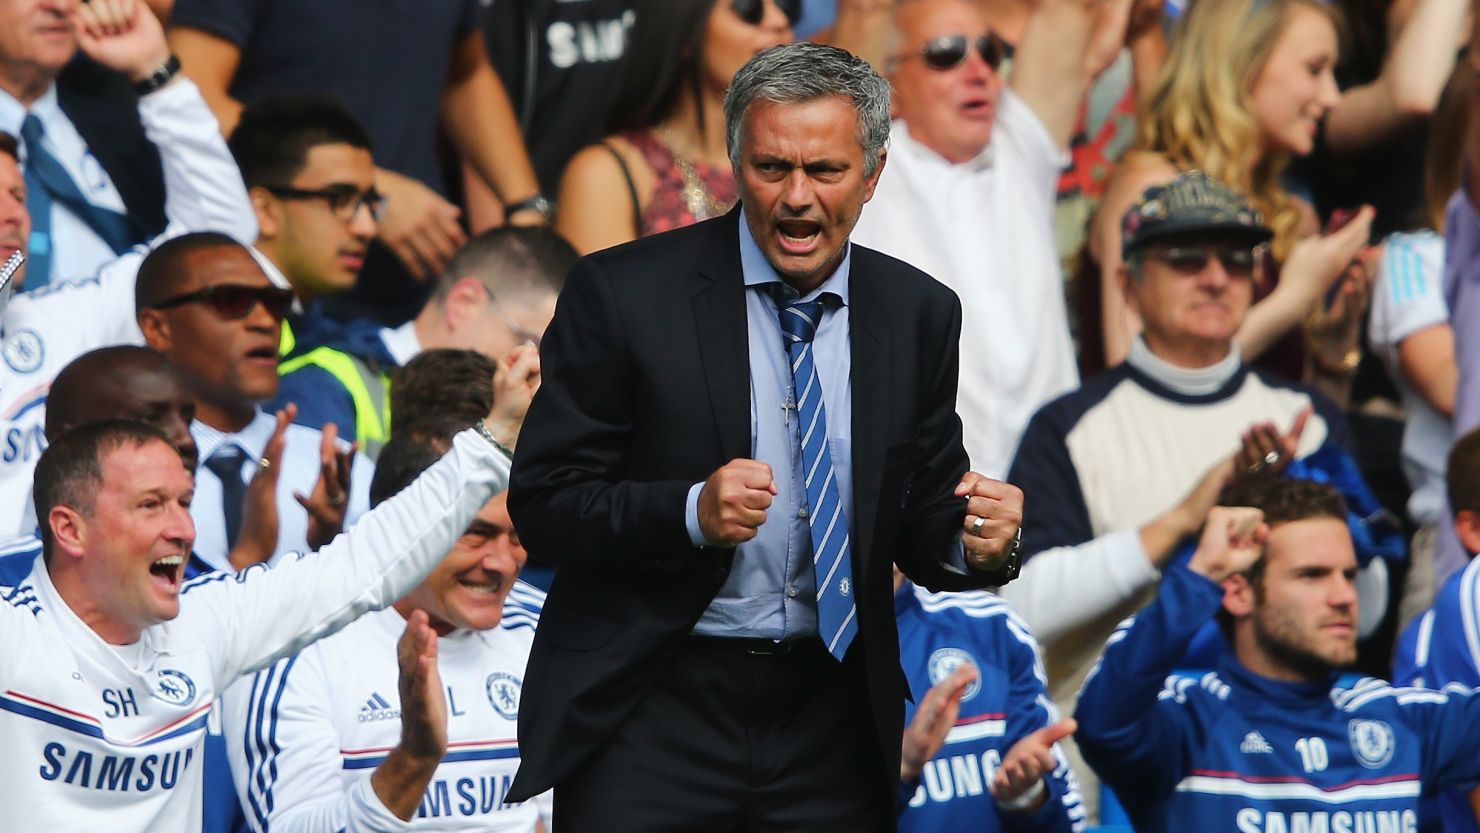 Jose Mourinho celebrates his side's second goal from Frank Lampard in the 2-0 win over Hull.